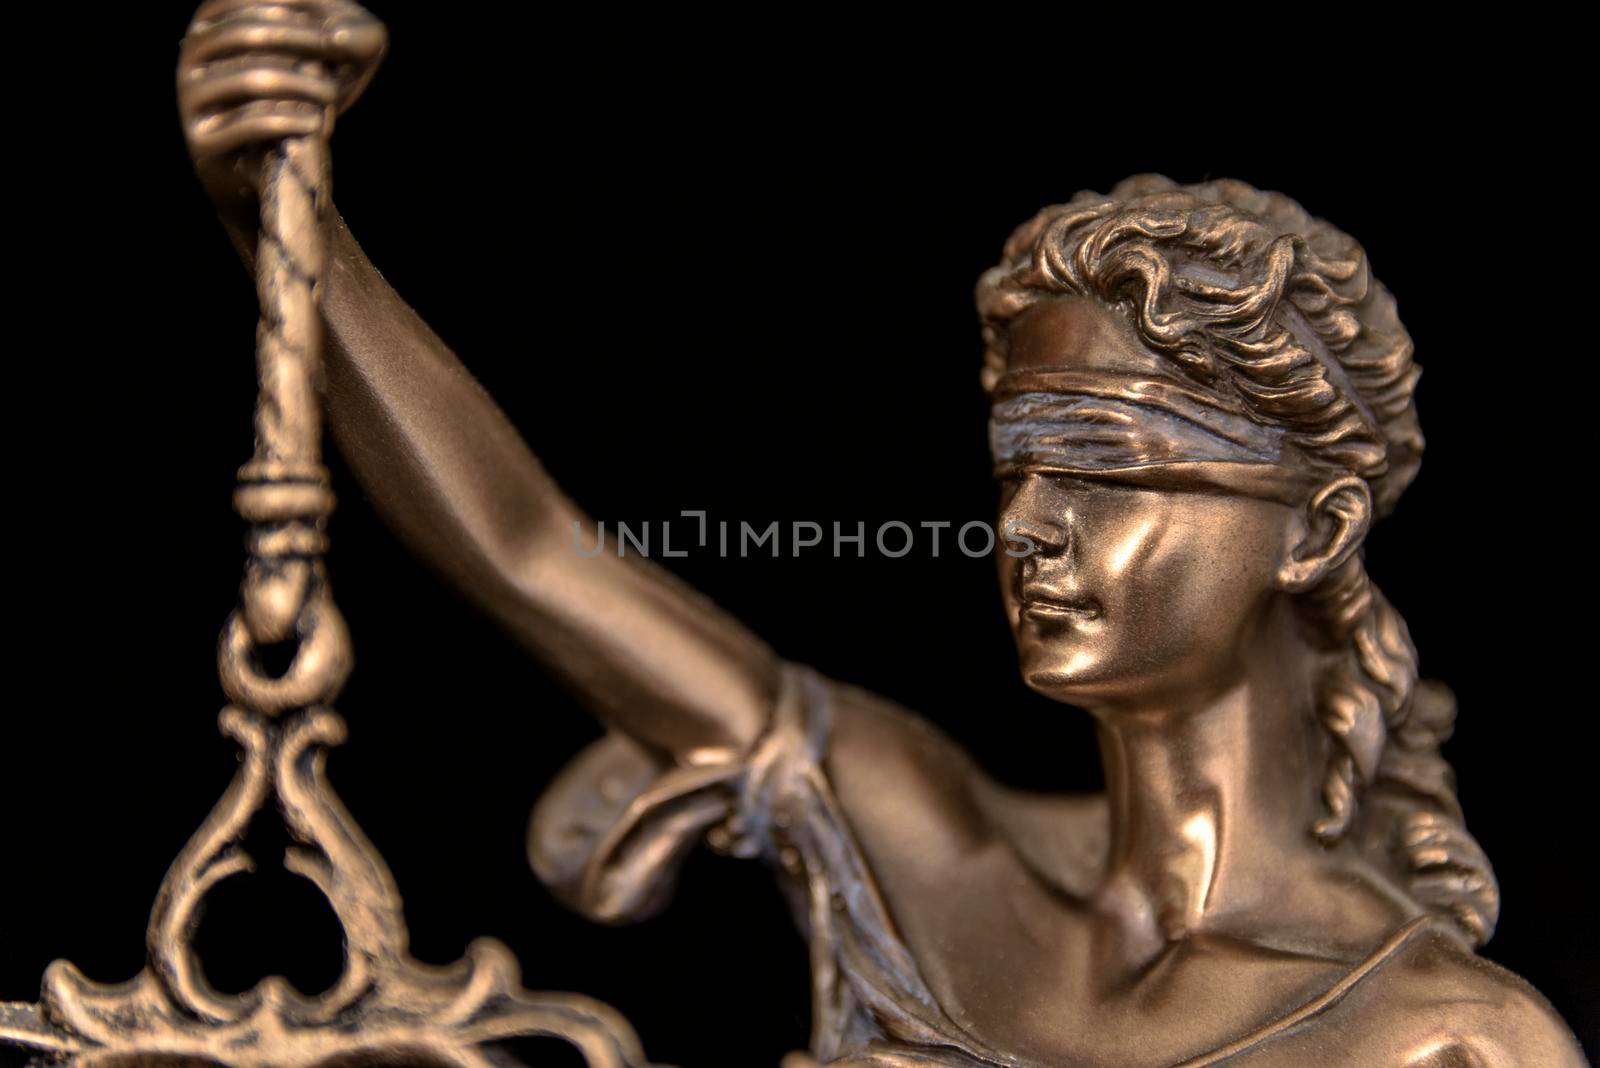 The Statue of Justice - lady justice or Iustitia Justitia the Roman goddess of Justice